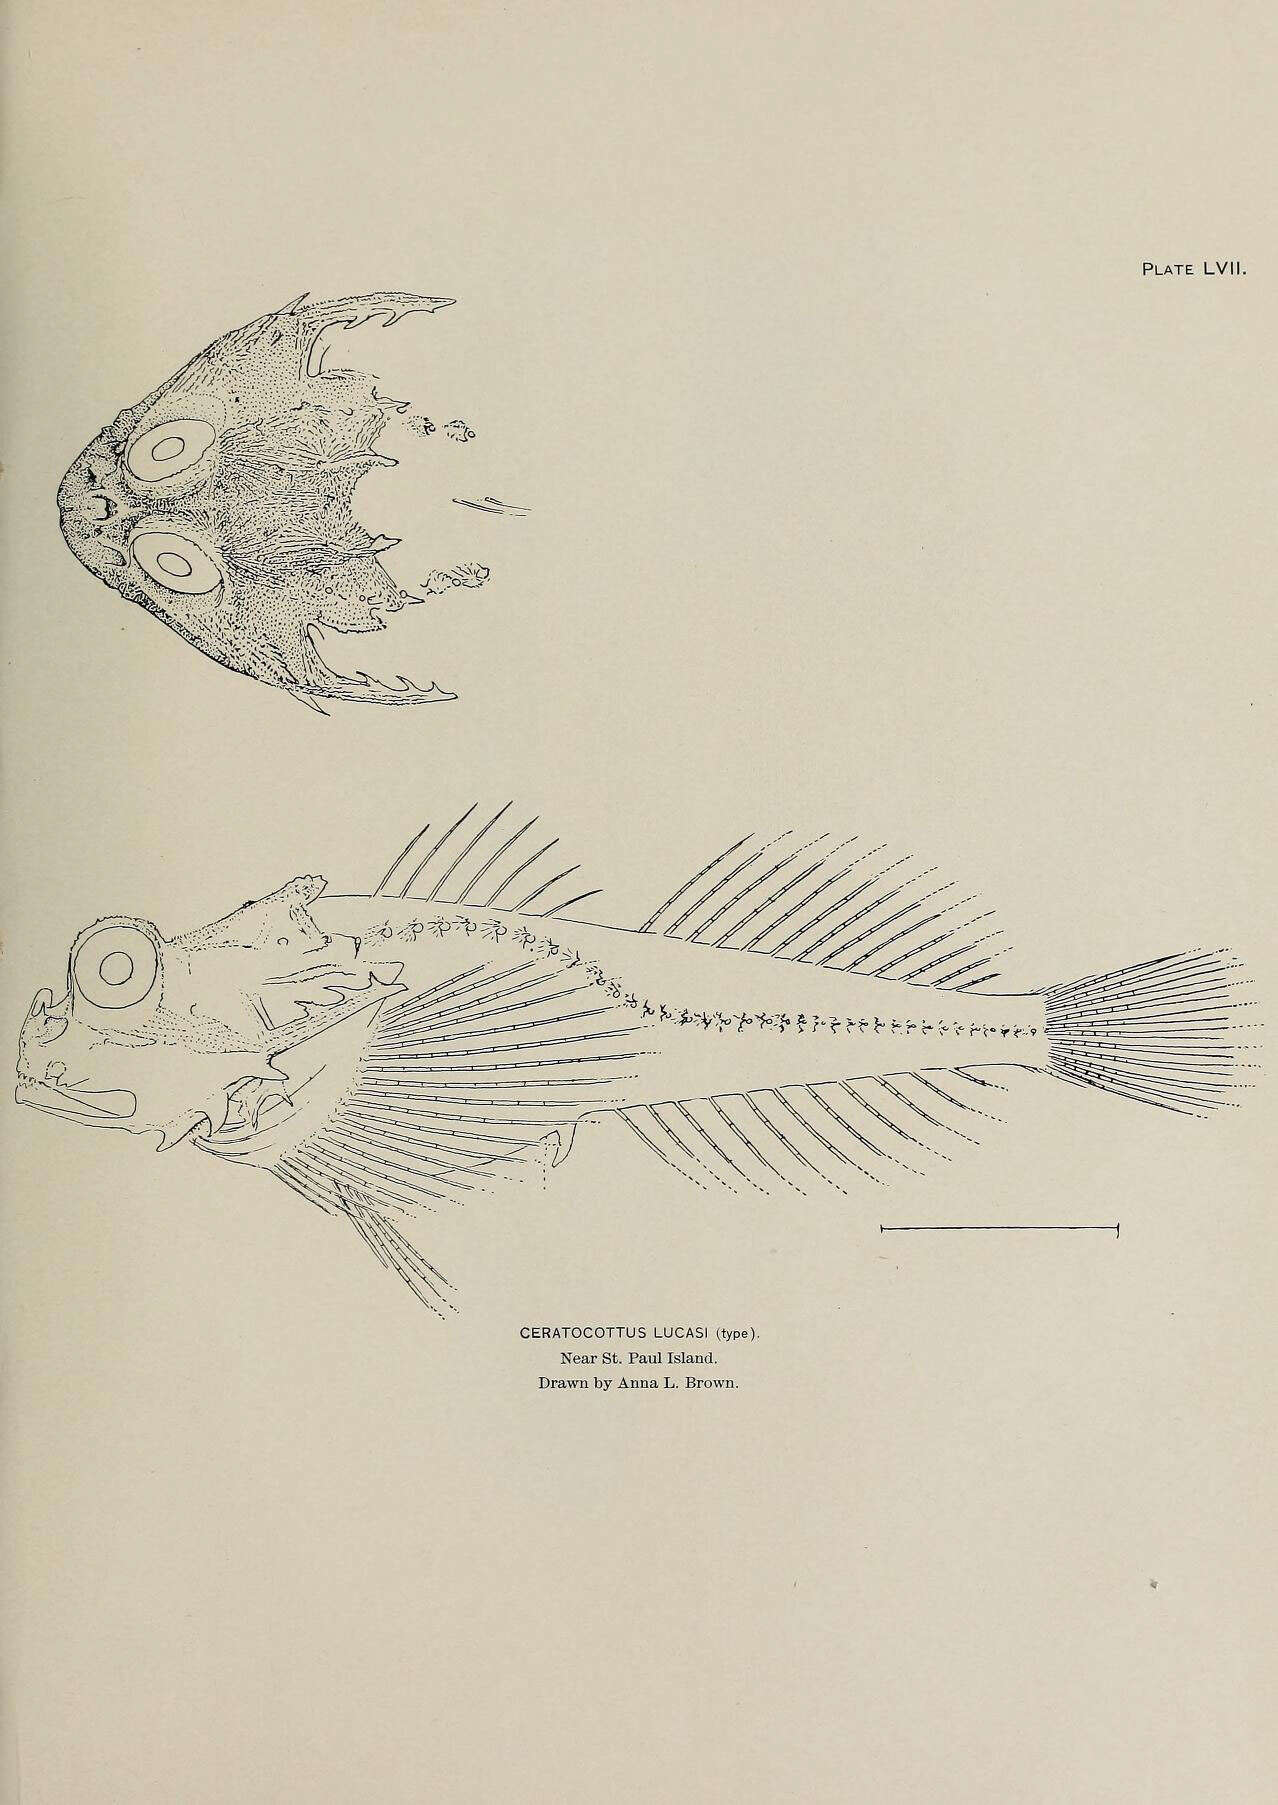 Image of Leister sculpin